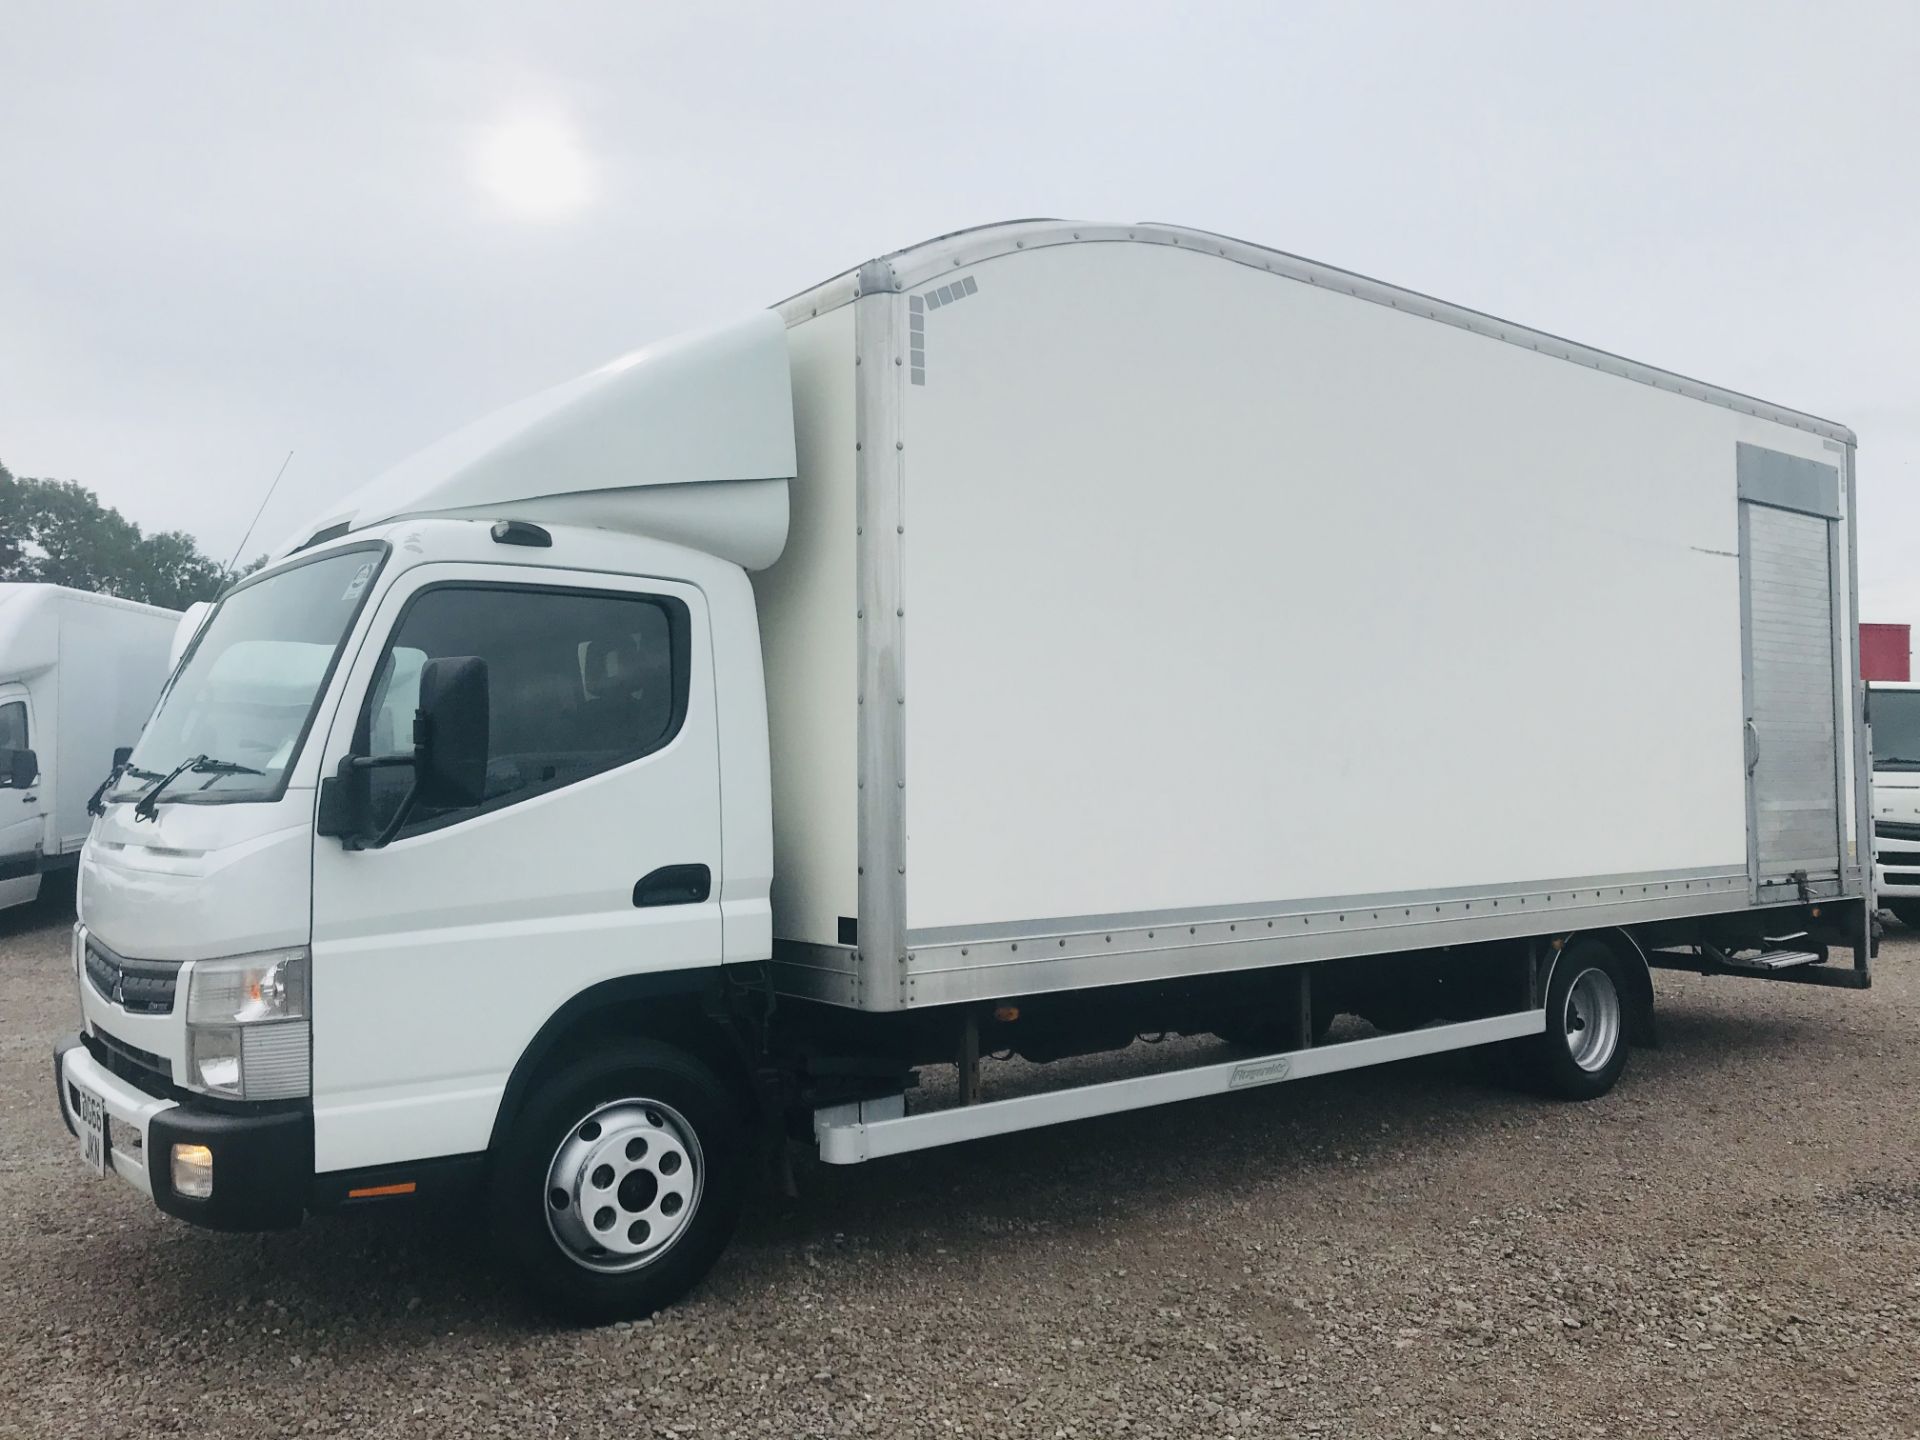 On Sale FUSO CANTER 7C15 "LWB" 22ft BOX VAN WITH ELECTRIC TAIL LIFT - 2017 MODEL - EURO 6 - ONLY 94K - Image 2 of 16